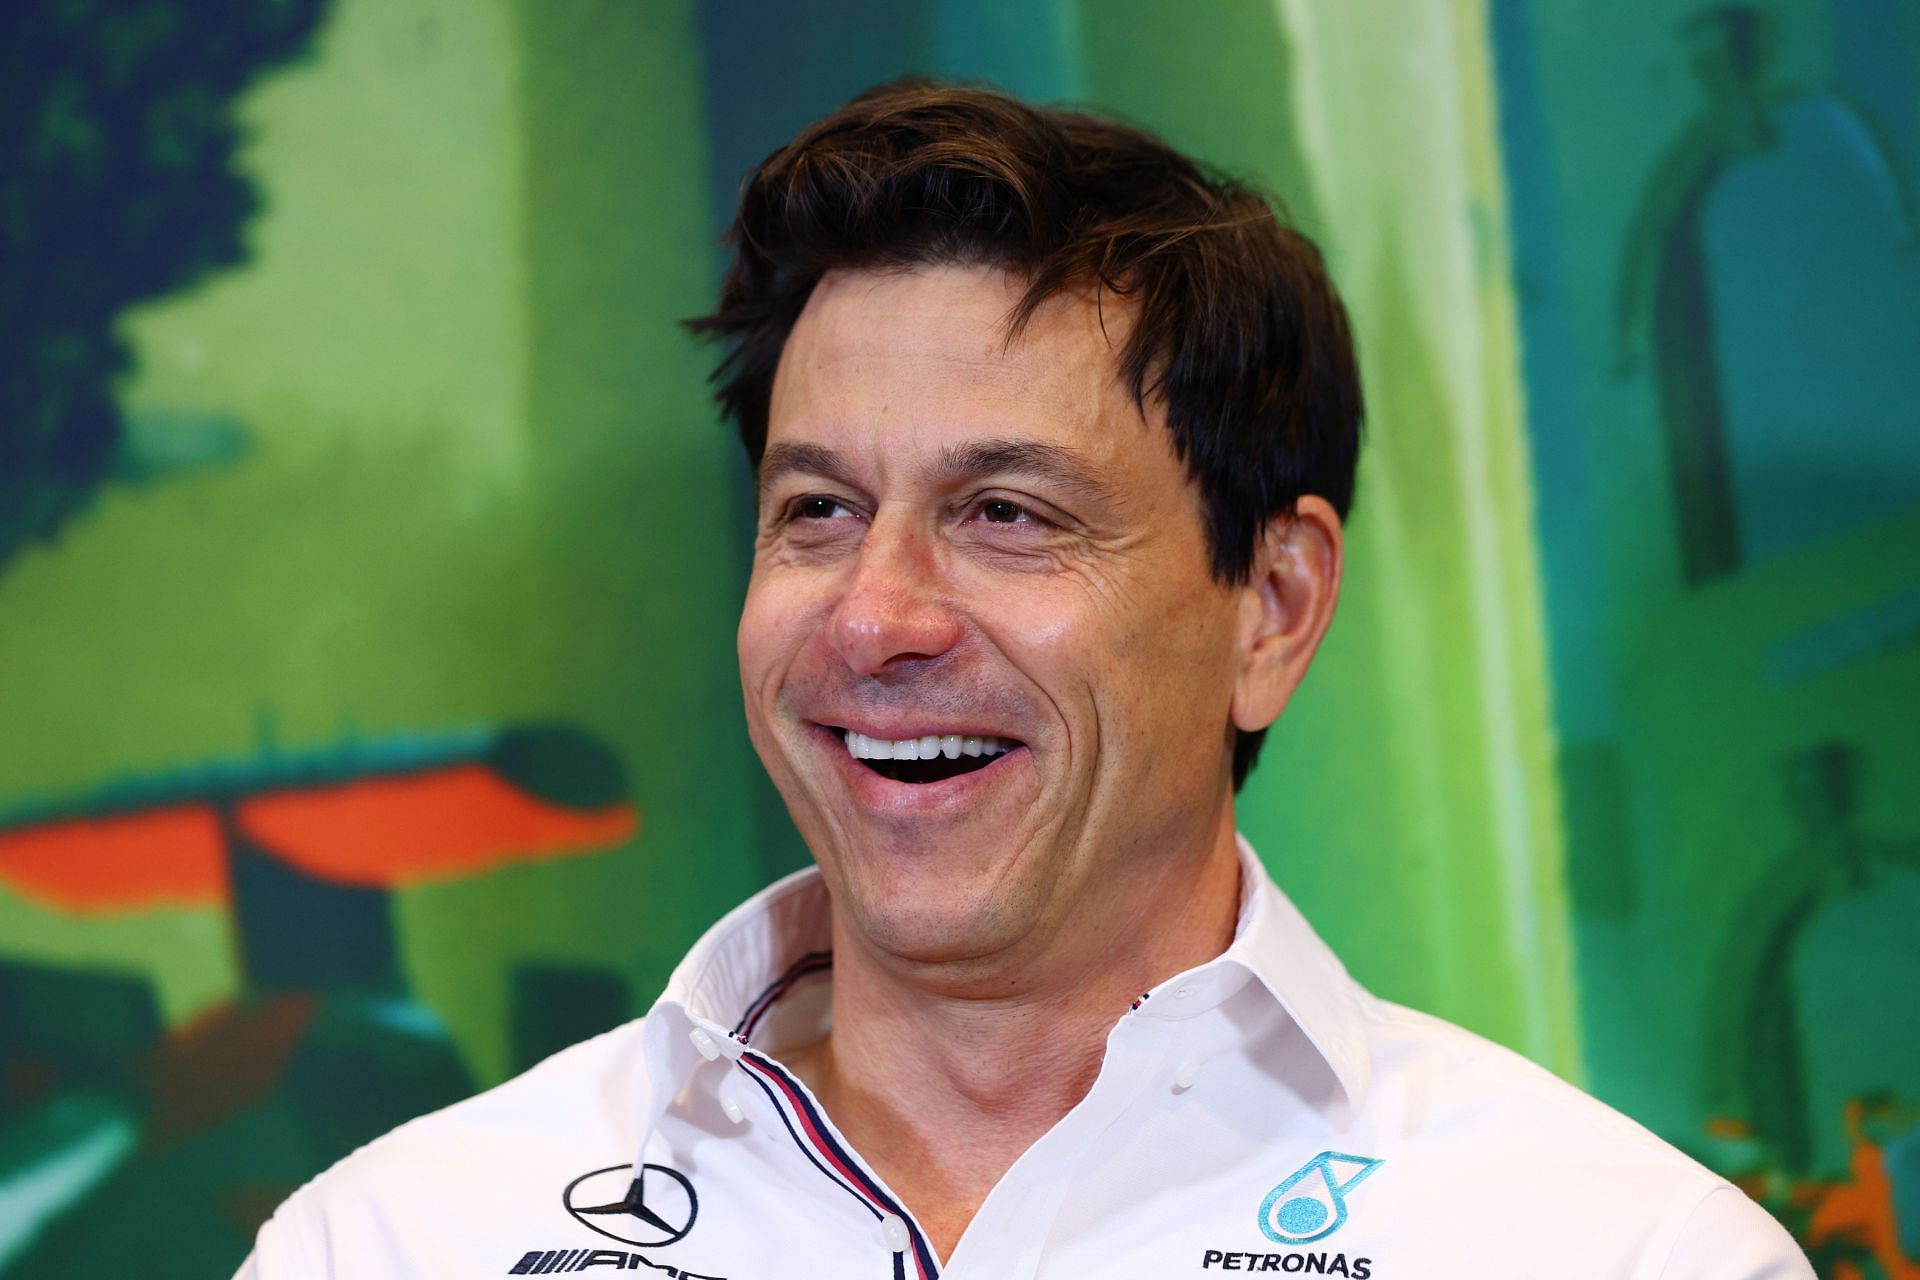 Toto Wolff at a press conference in Azerbaijan. (Photo by Clive Rose/Getty Images)